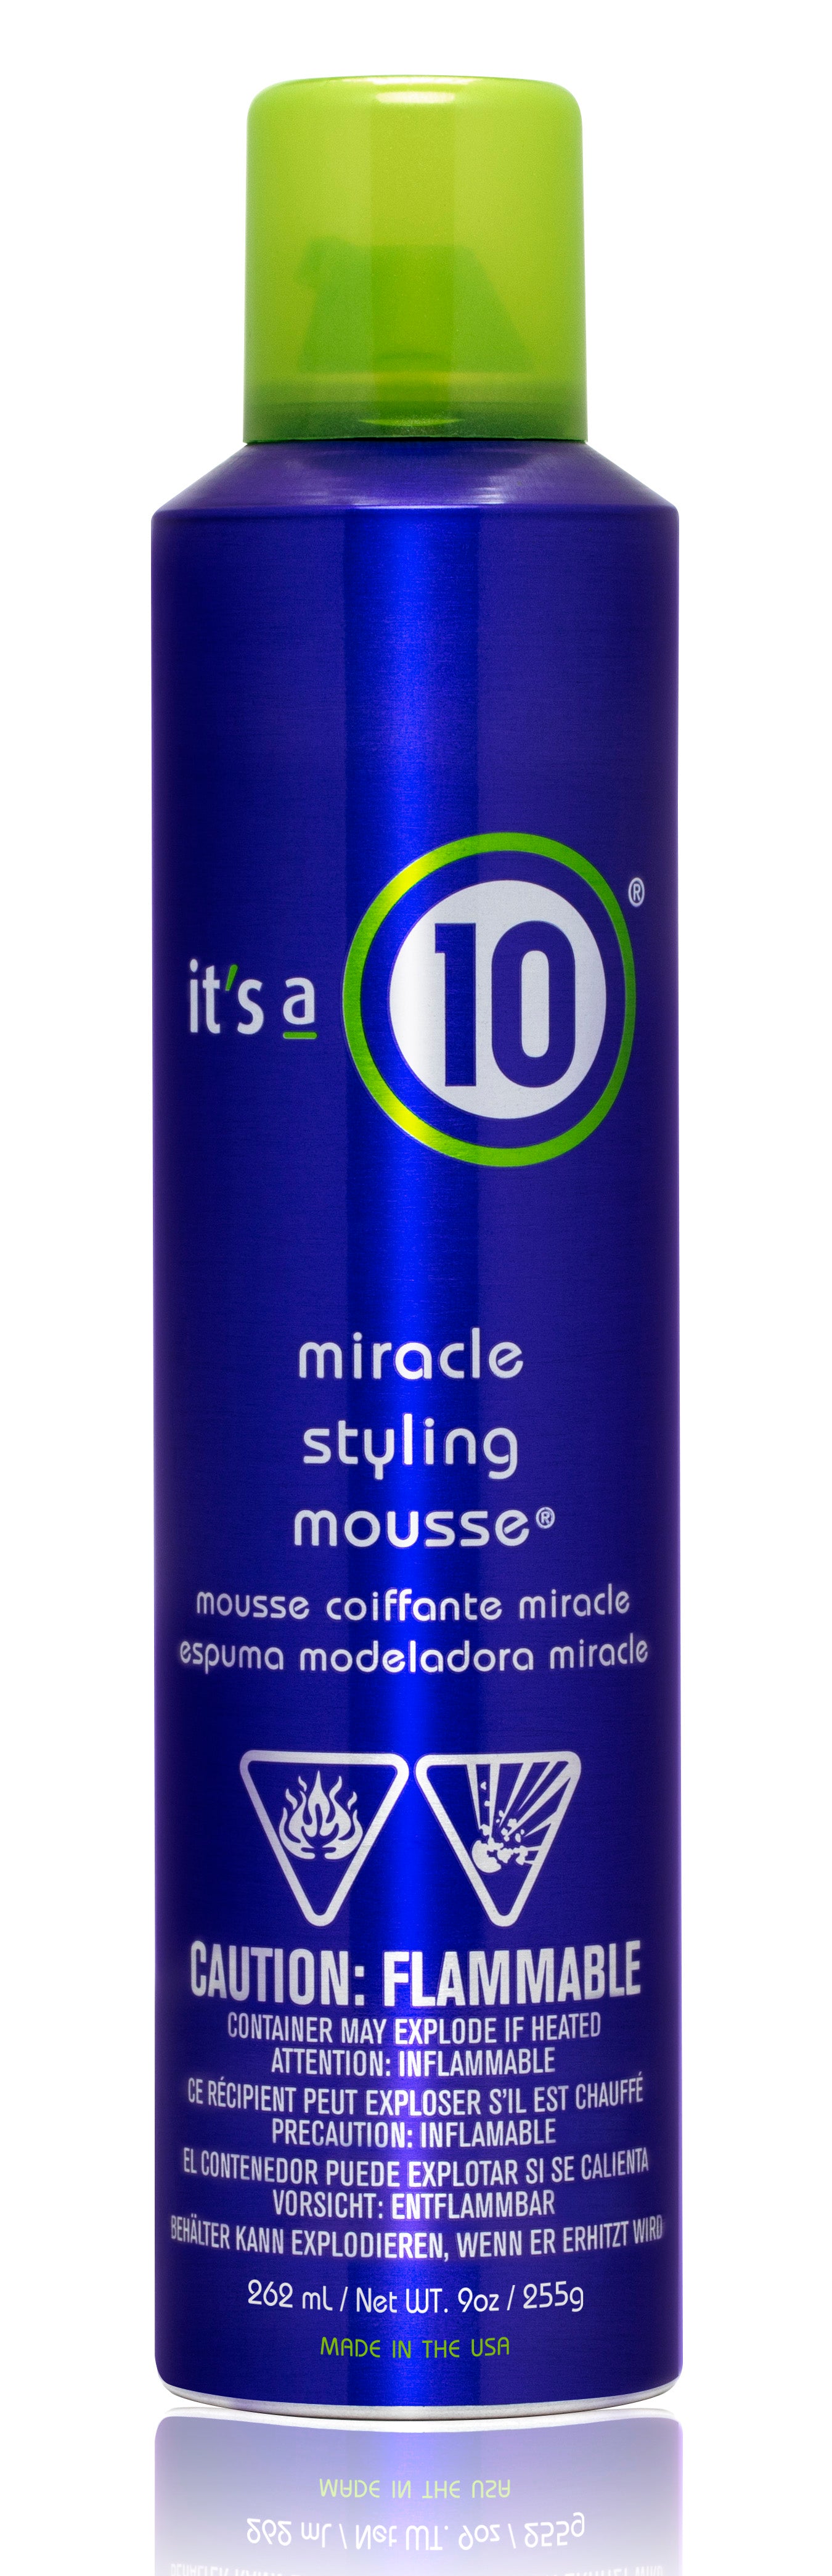 It’s a 10 Miracle Styling Mousse